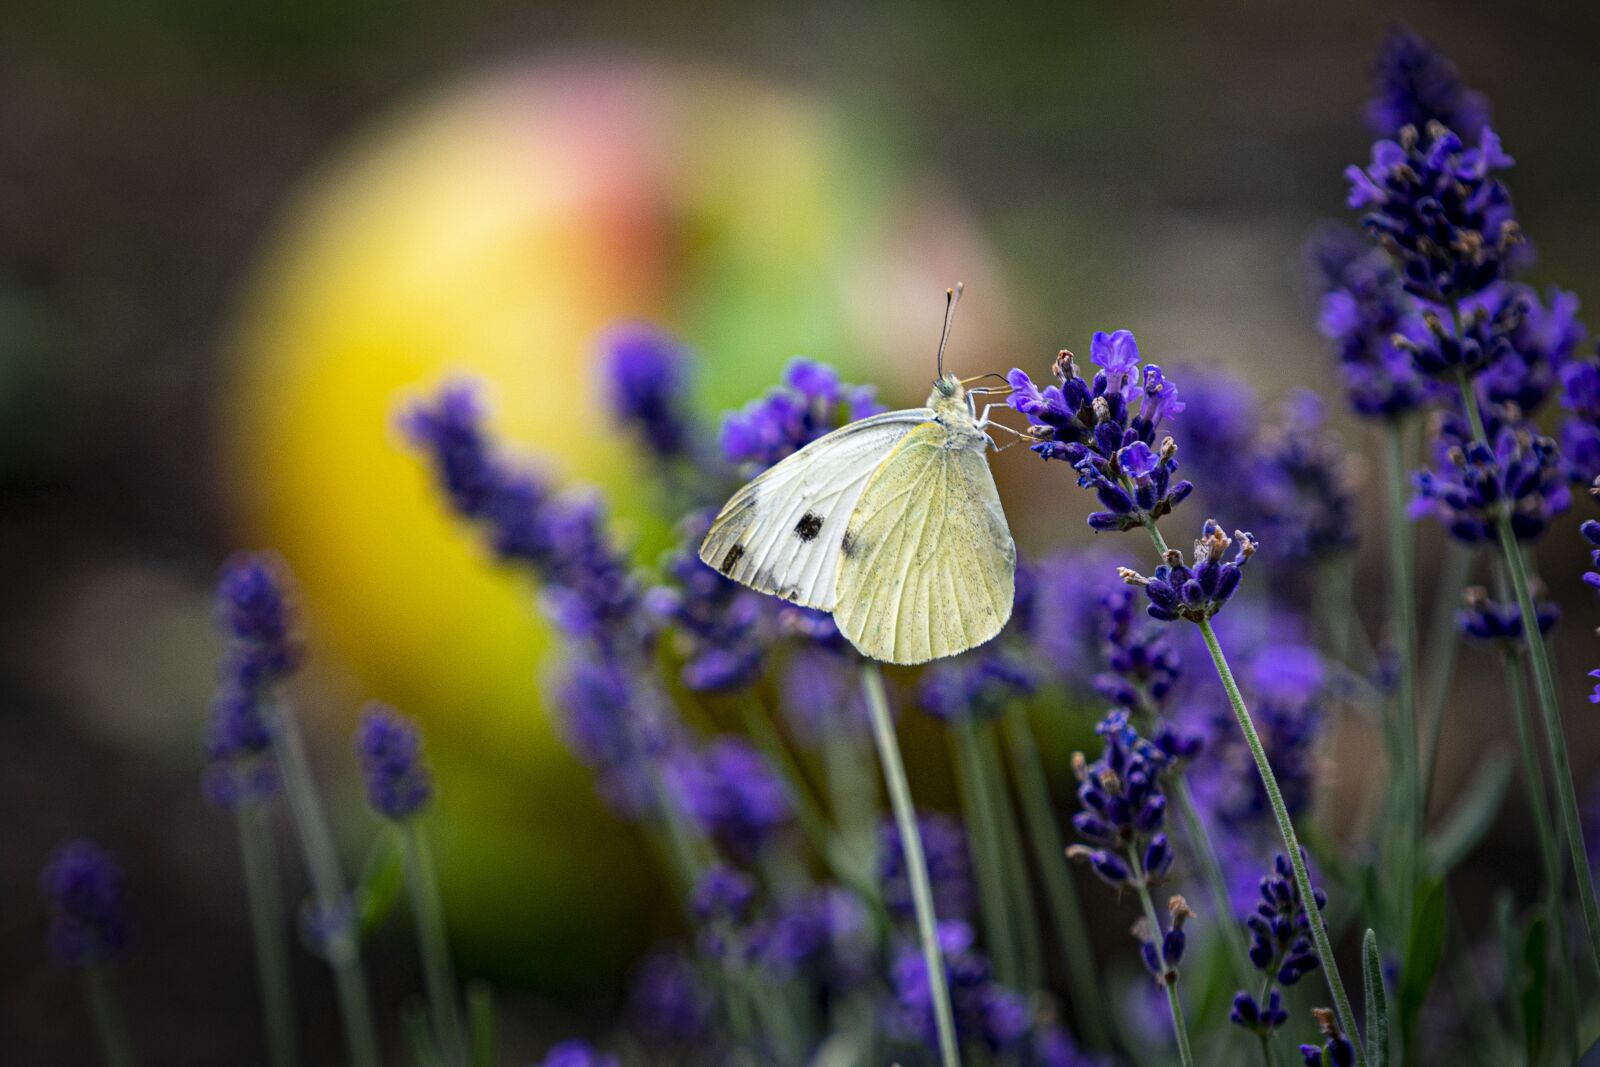 Sony a7 II sample photo. Lavender, butterfly, nature photography